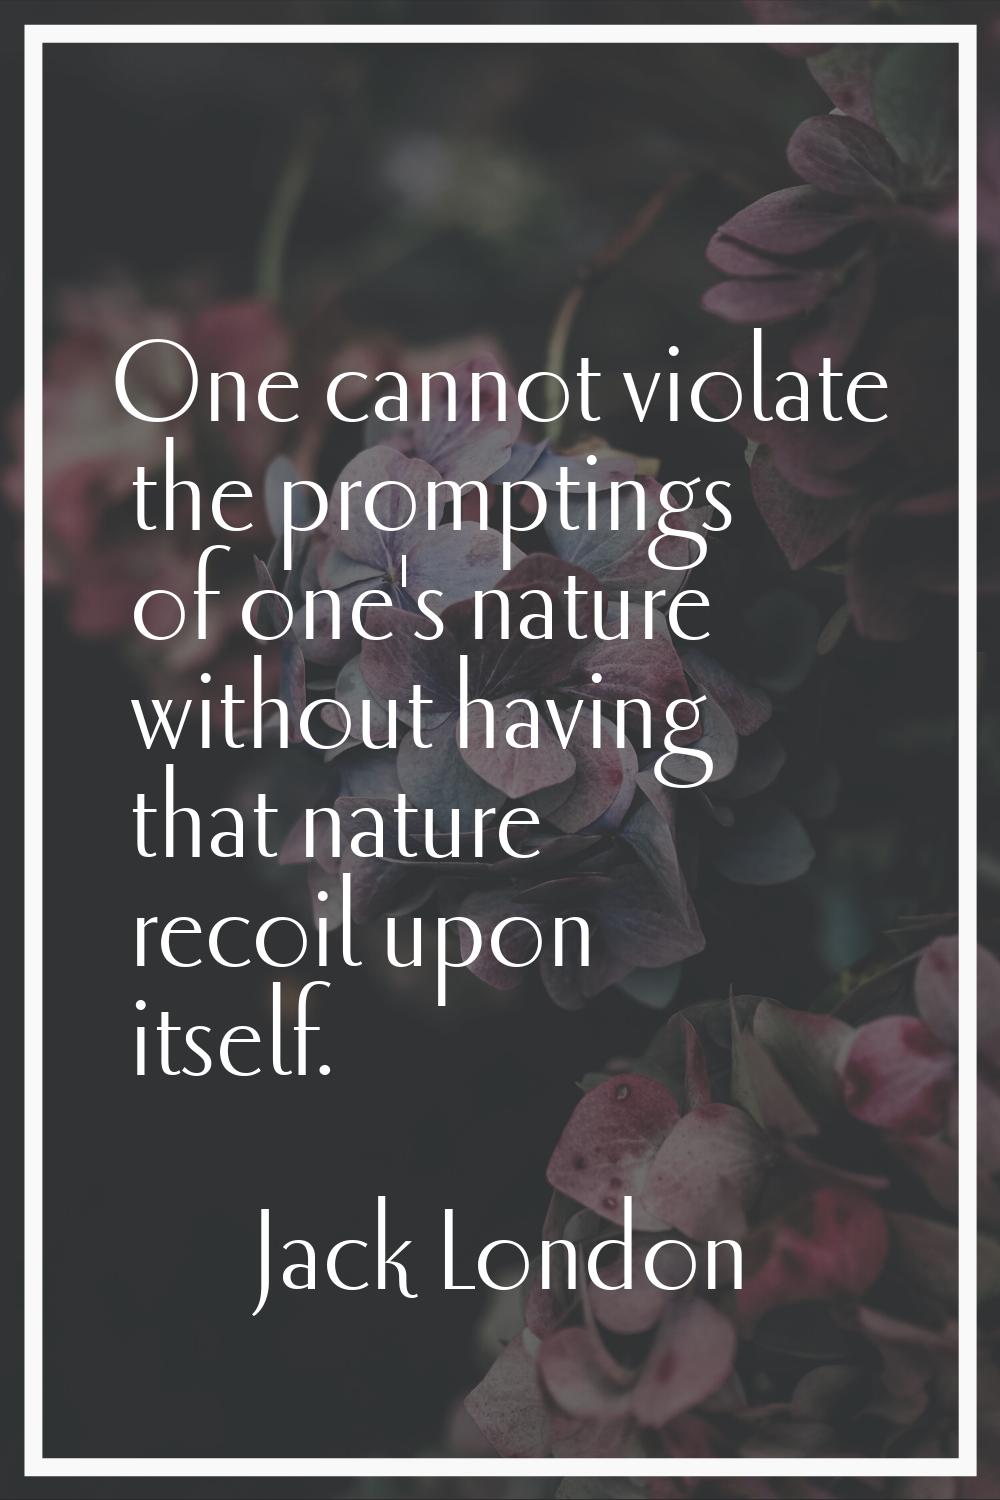 One cannot violate the promptings of one's nature without having that nature recoil upon itself.